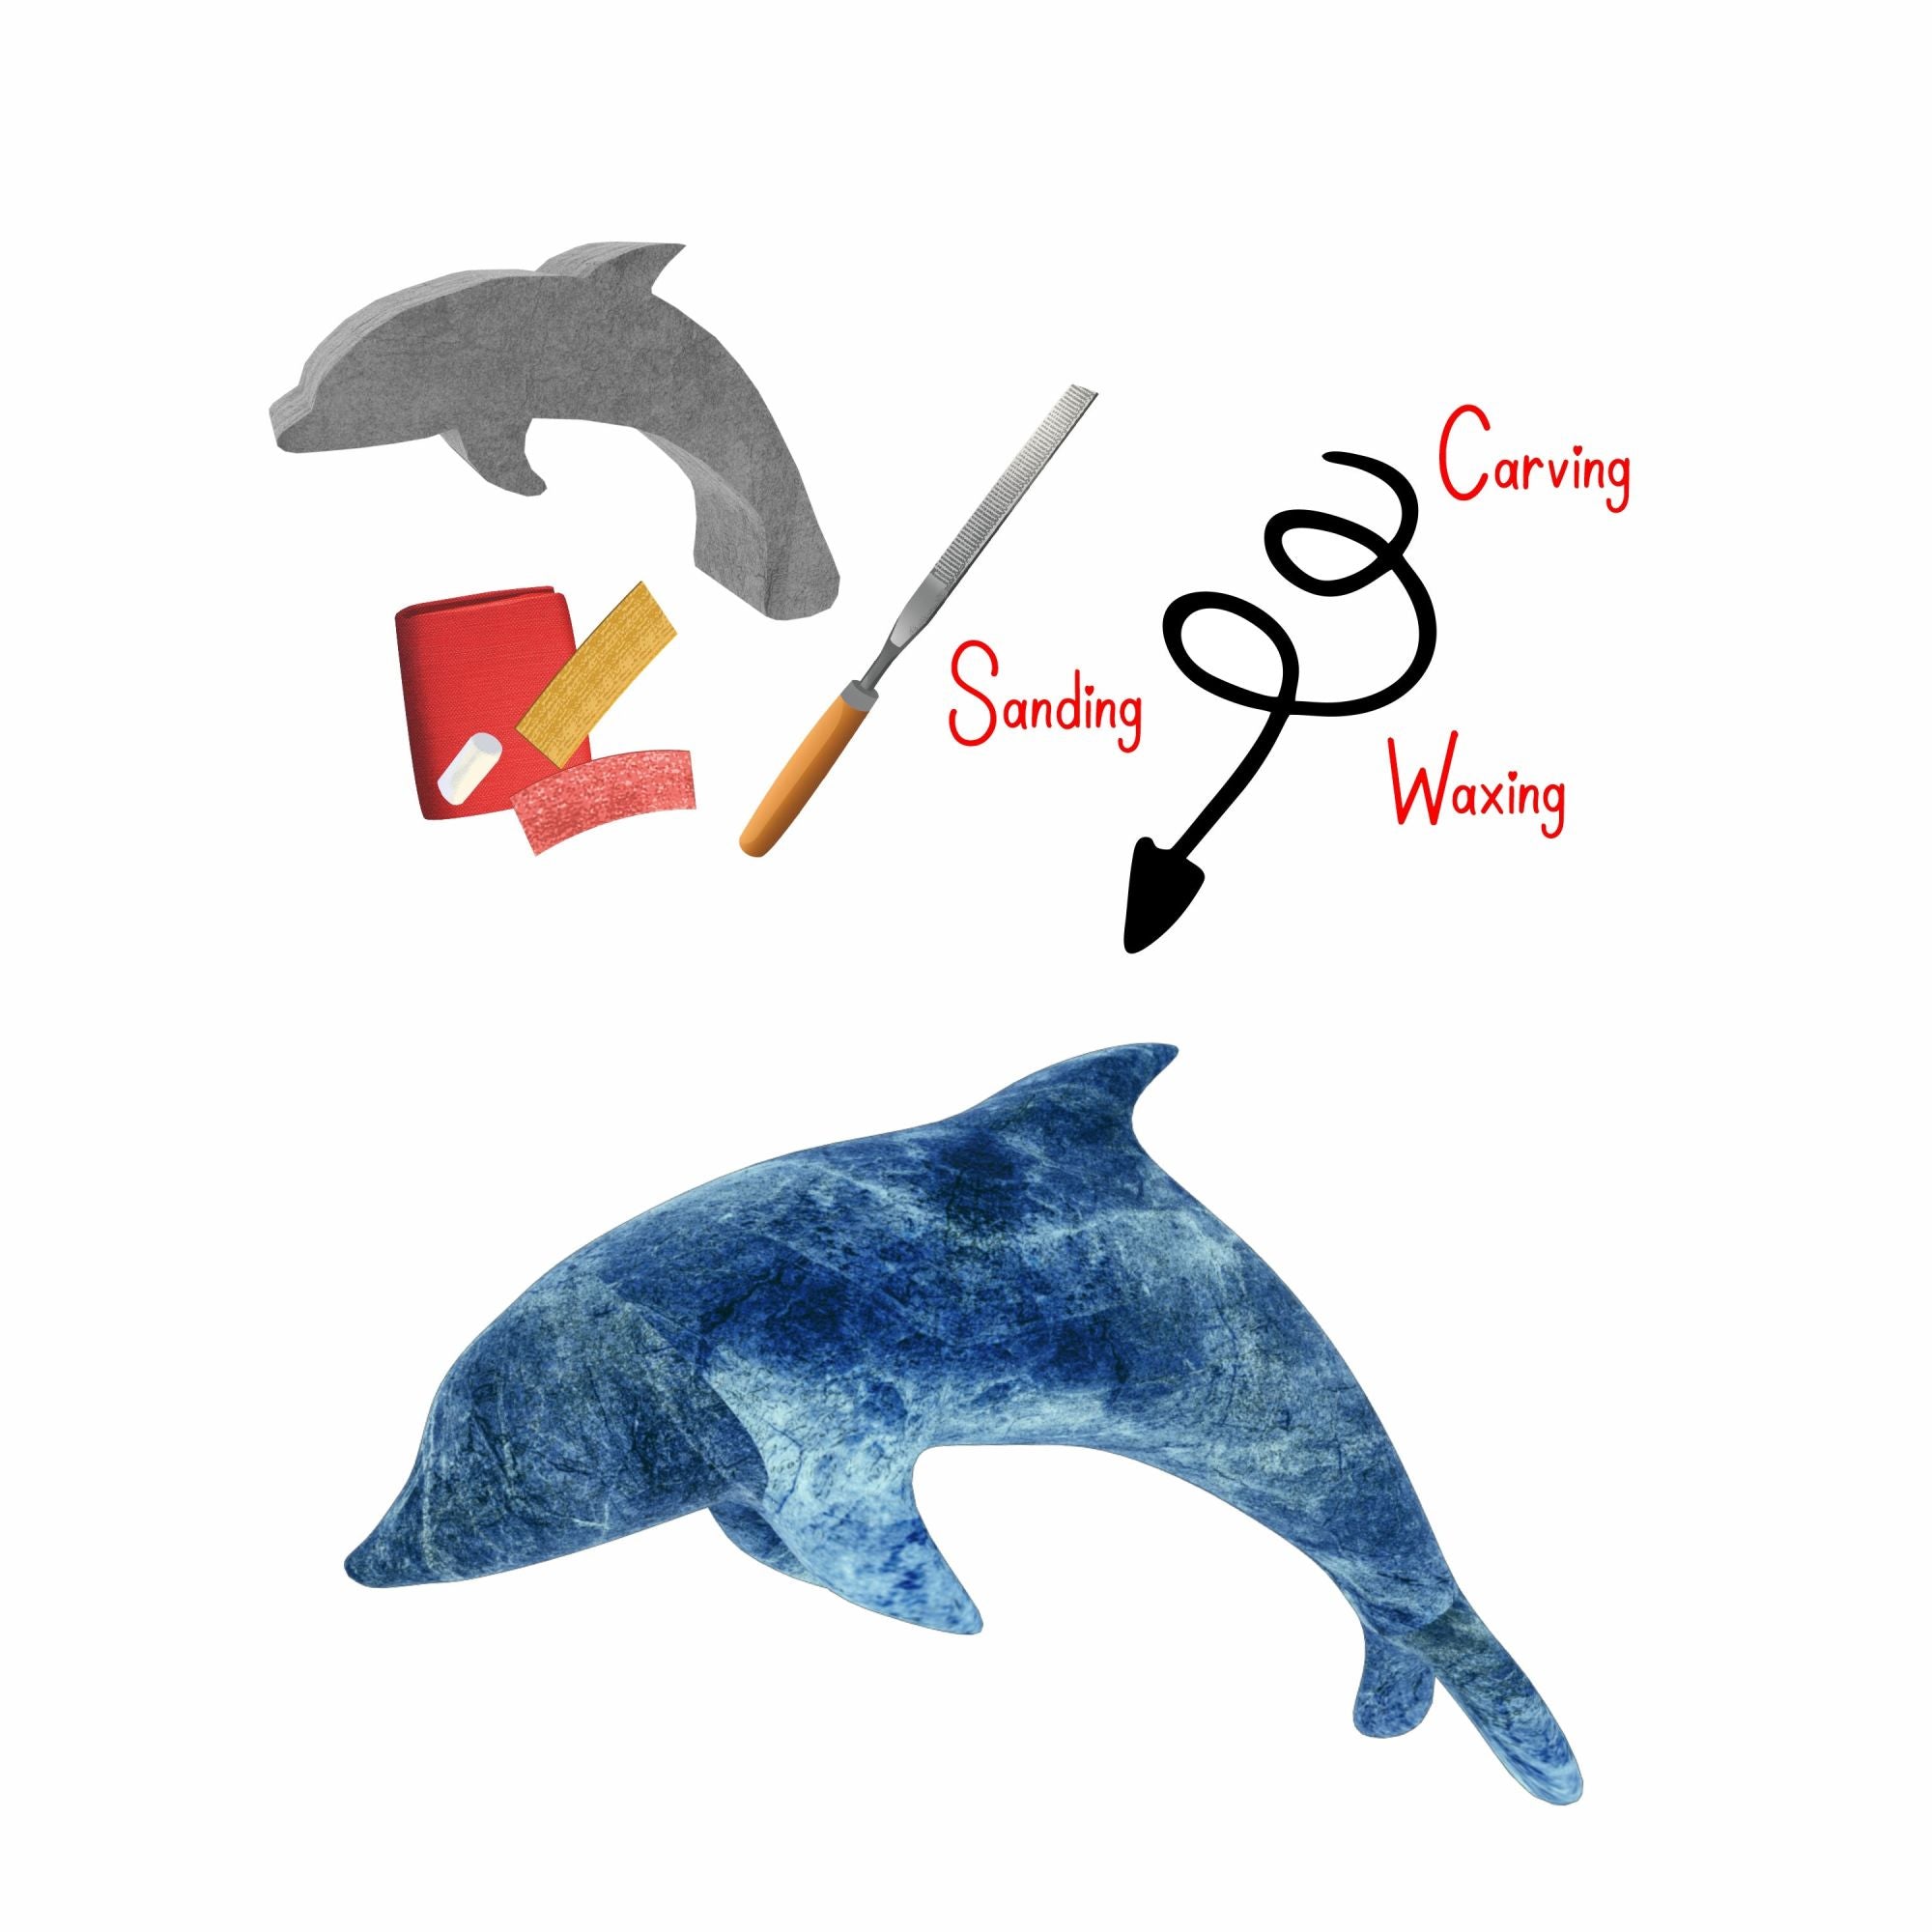 Dolphin Soapstone Carving Kit: Safe and Fun DIY Craft for Kids and Adults with two people carving soapstone.